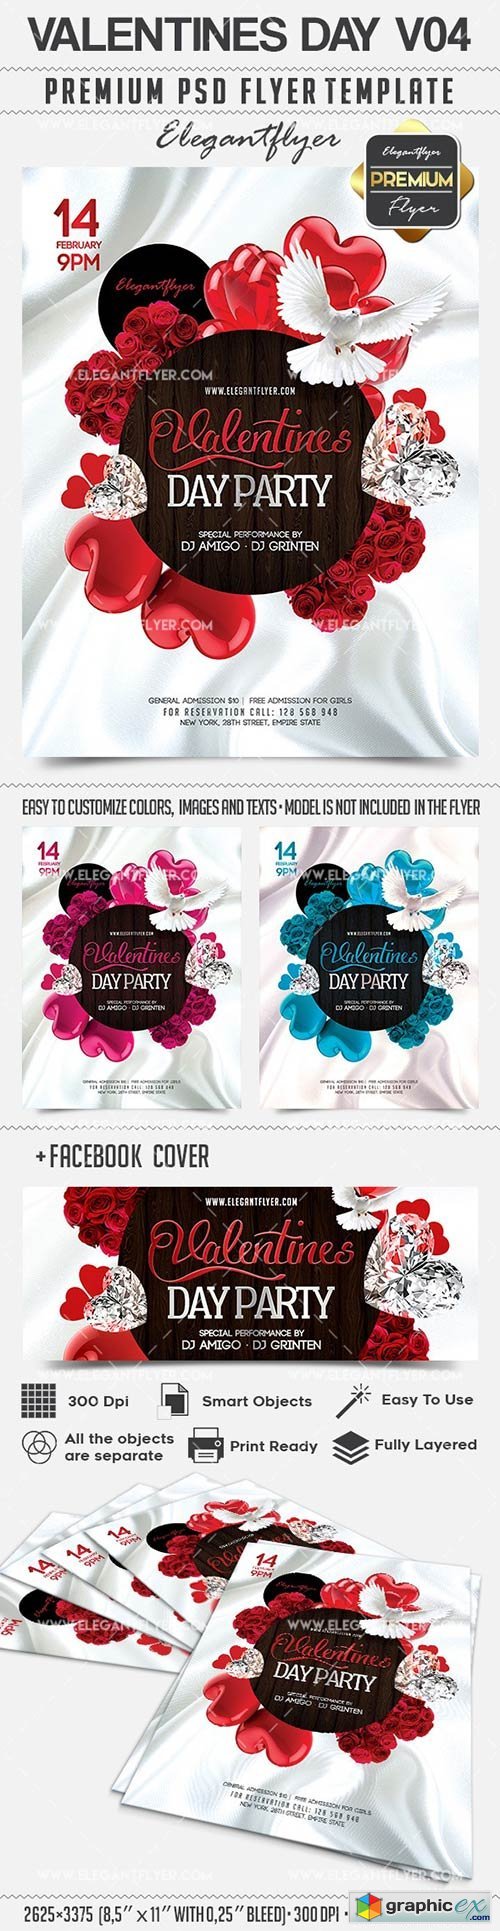 Valentines Day V04  Flyer PSD Template + Facebook Cover